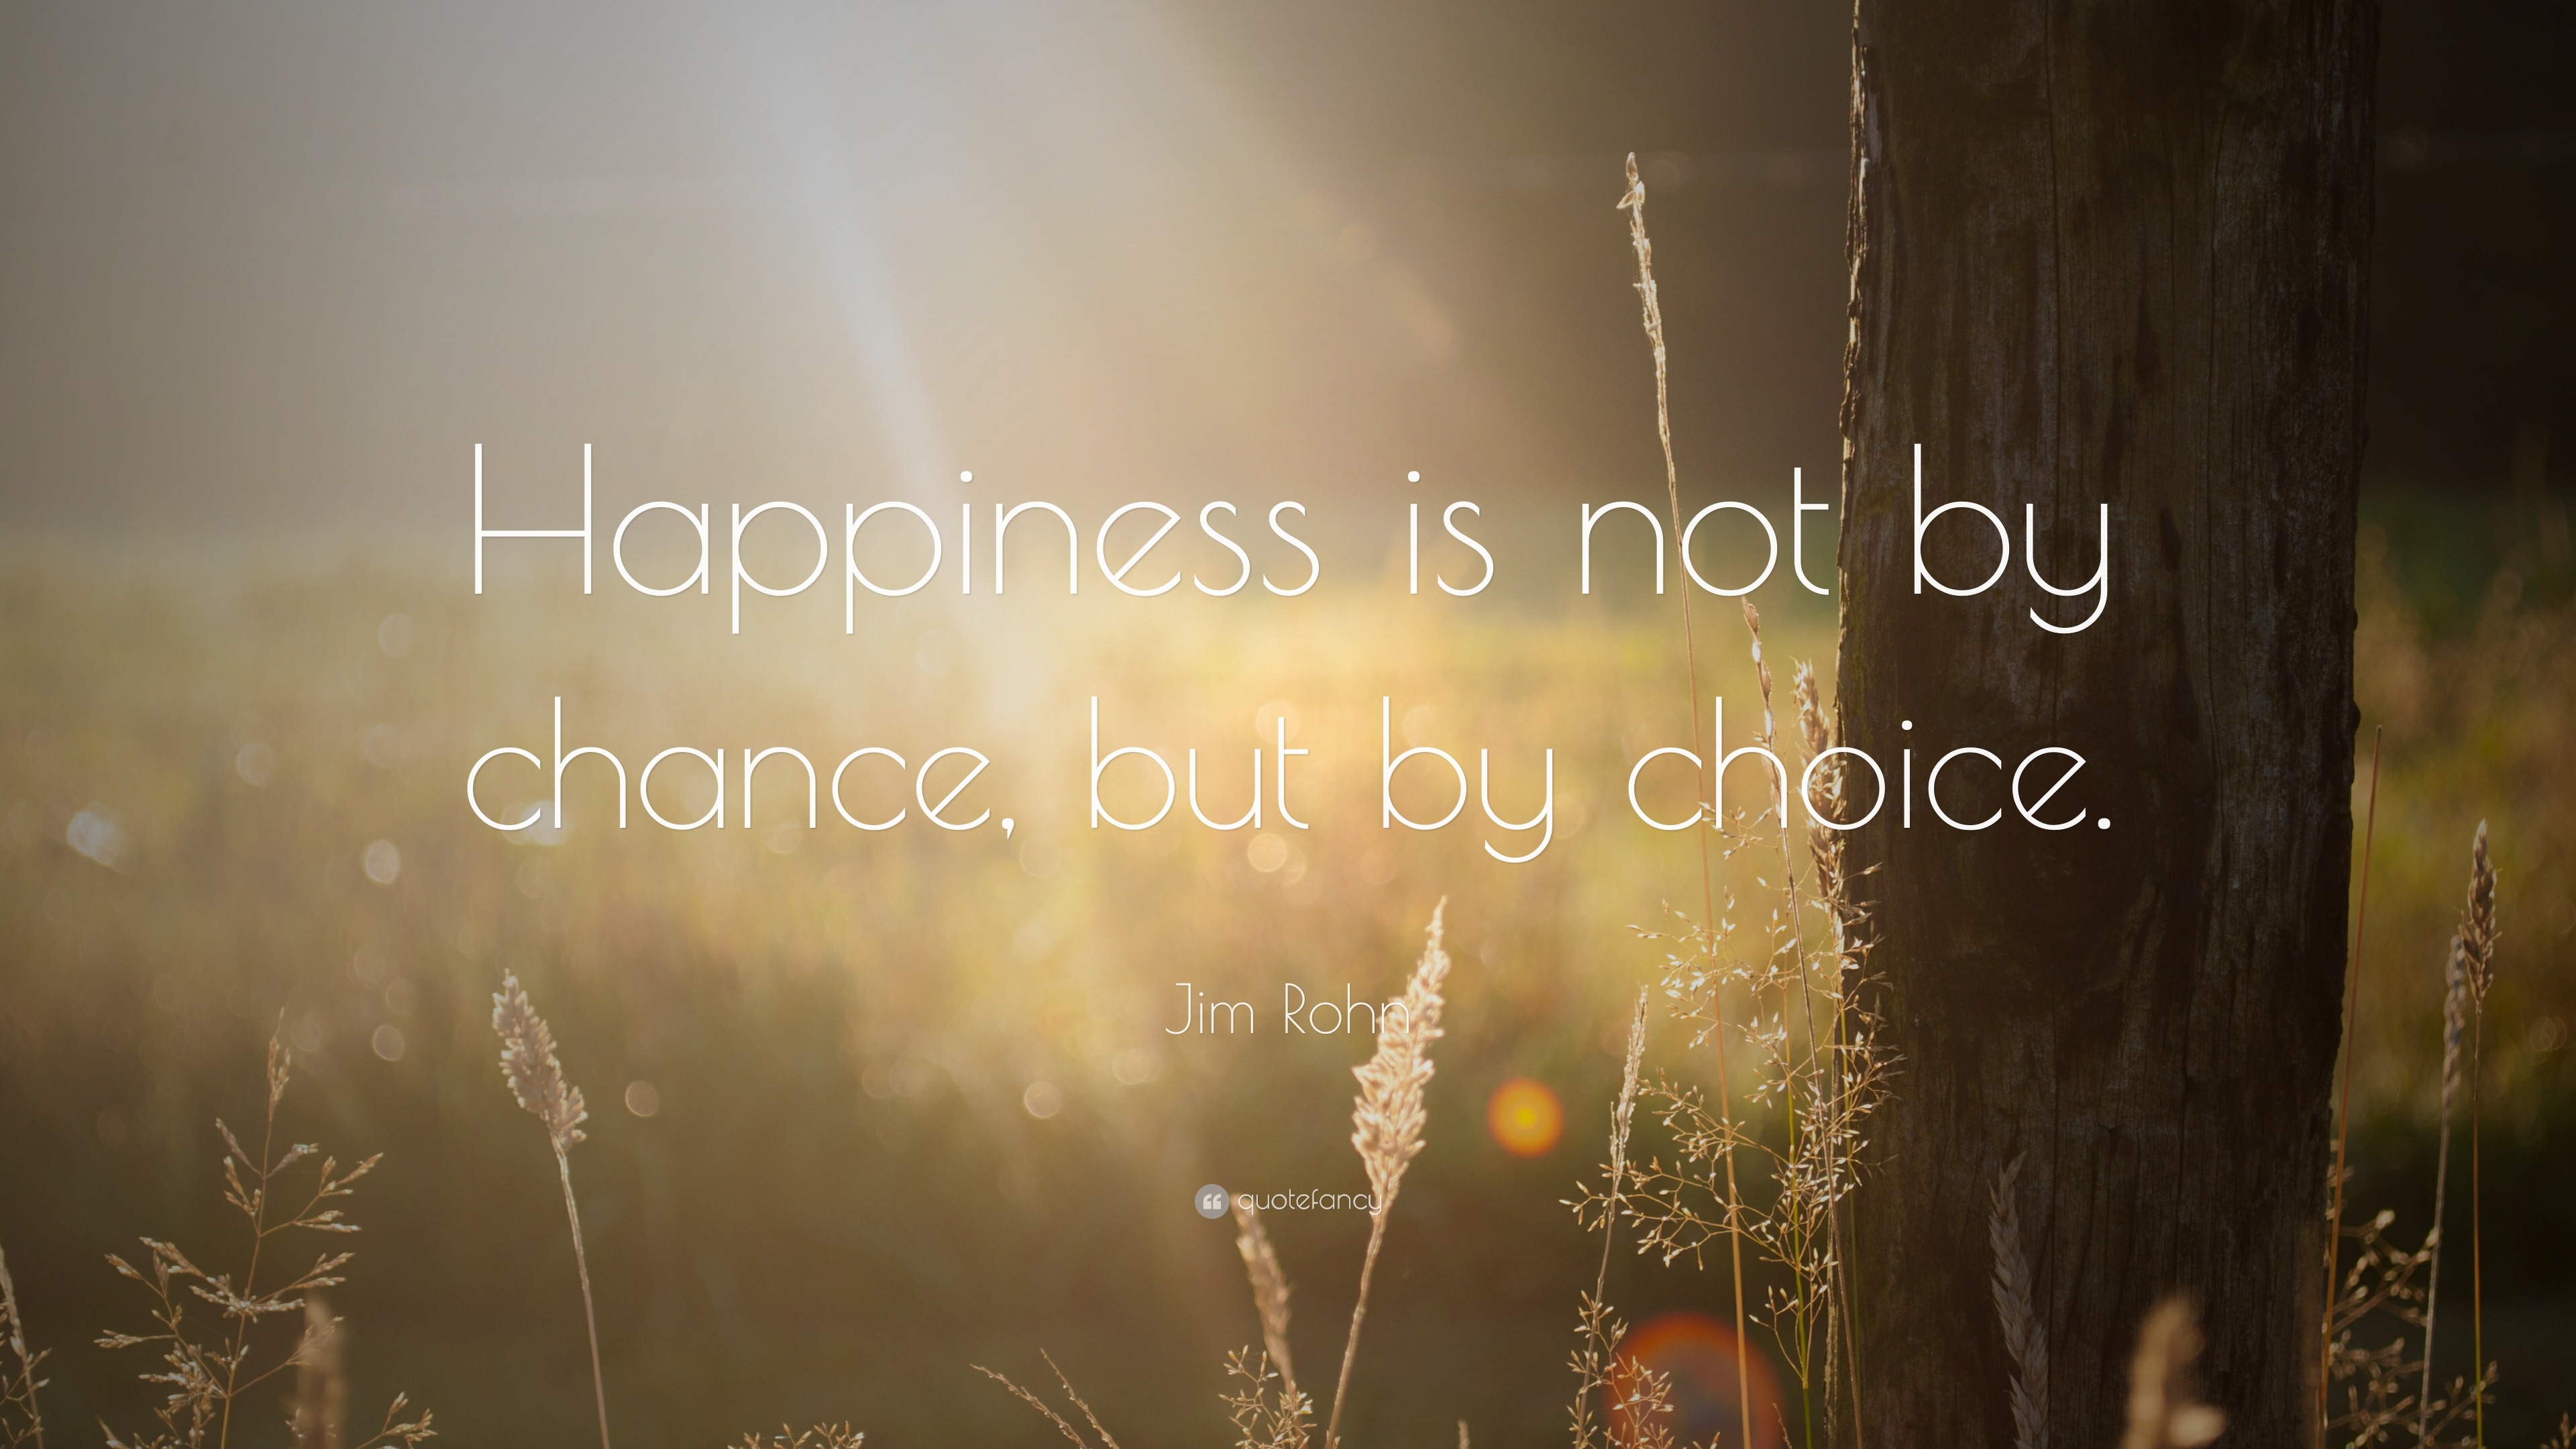 Jim Rohn Quote: “Happiness is not by chance, but by choice.”